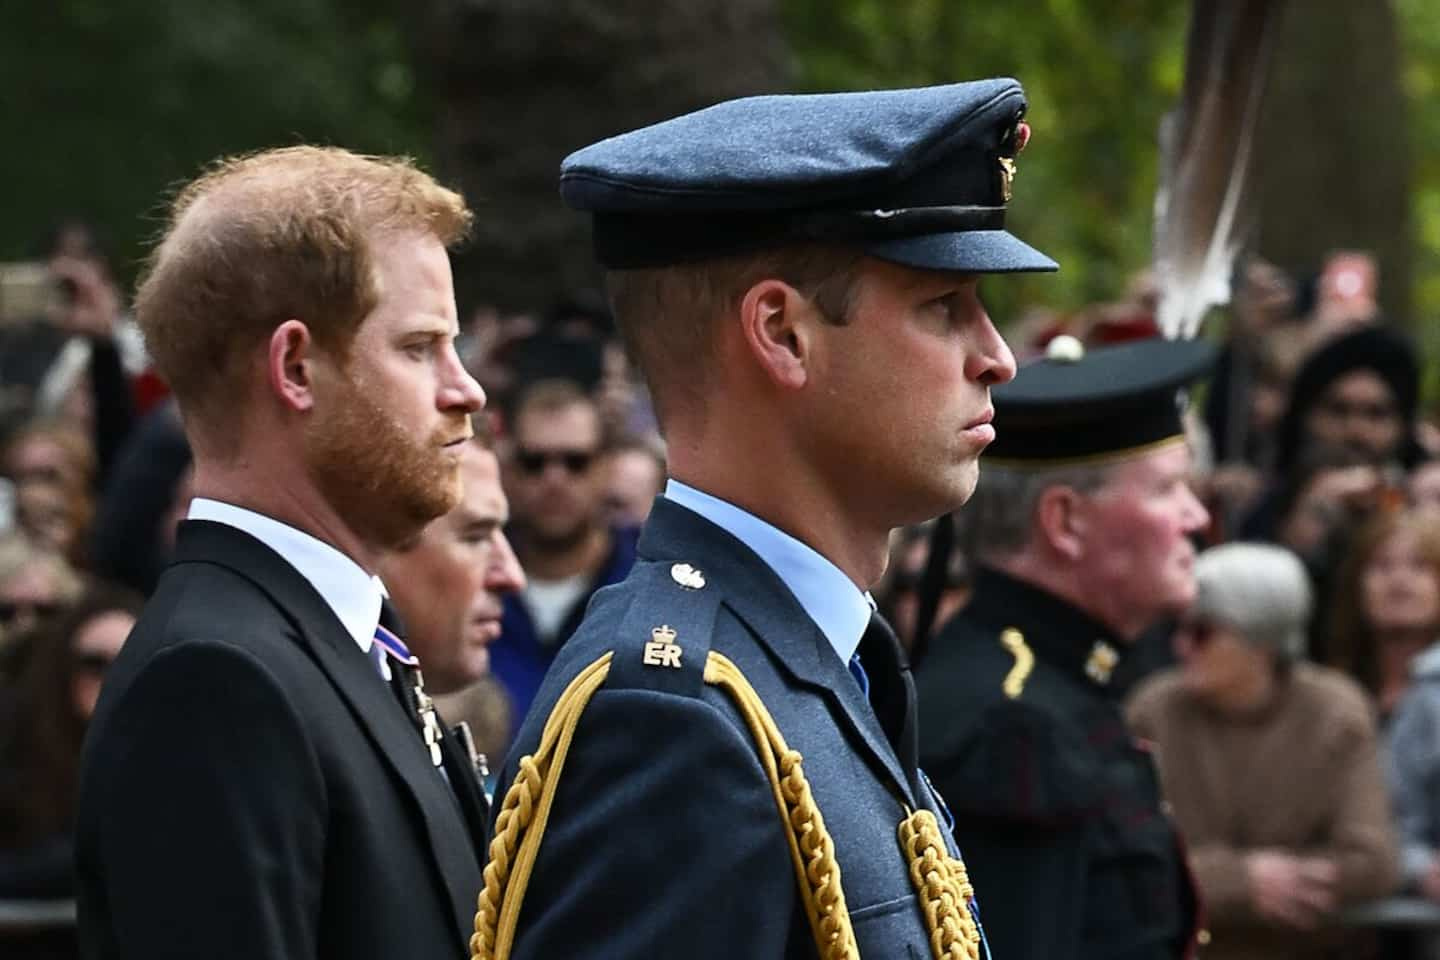 Prince Harry accuses brother William of physically attacking him in 2019